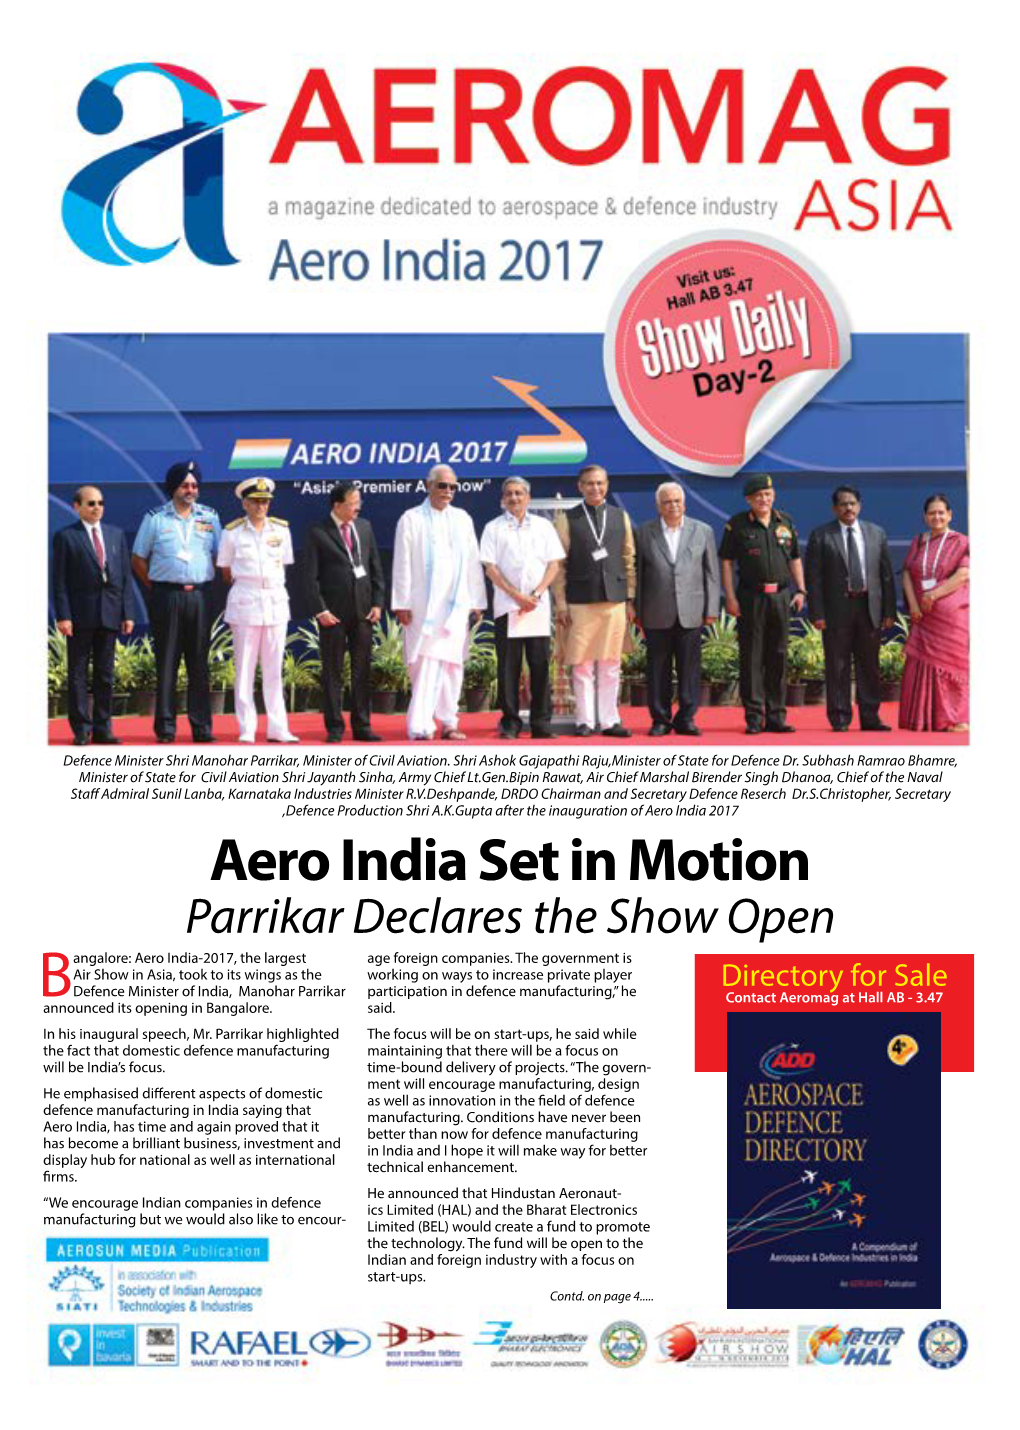 Aero India Set in Motion Parrikar Declares the Show Open Angalore: Aero India-2017, the Largest Age Foreign Companies